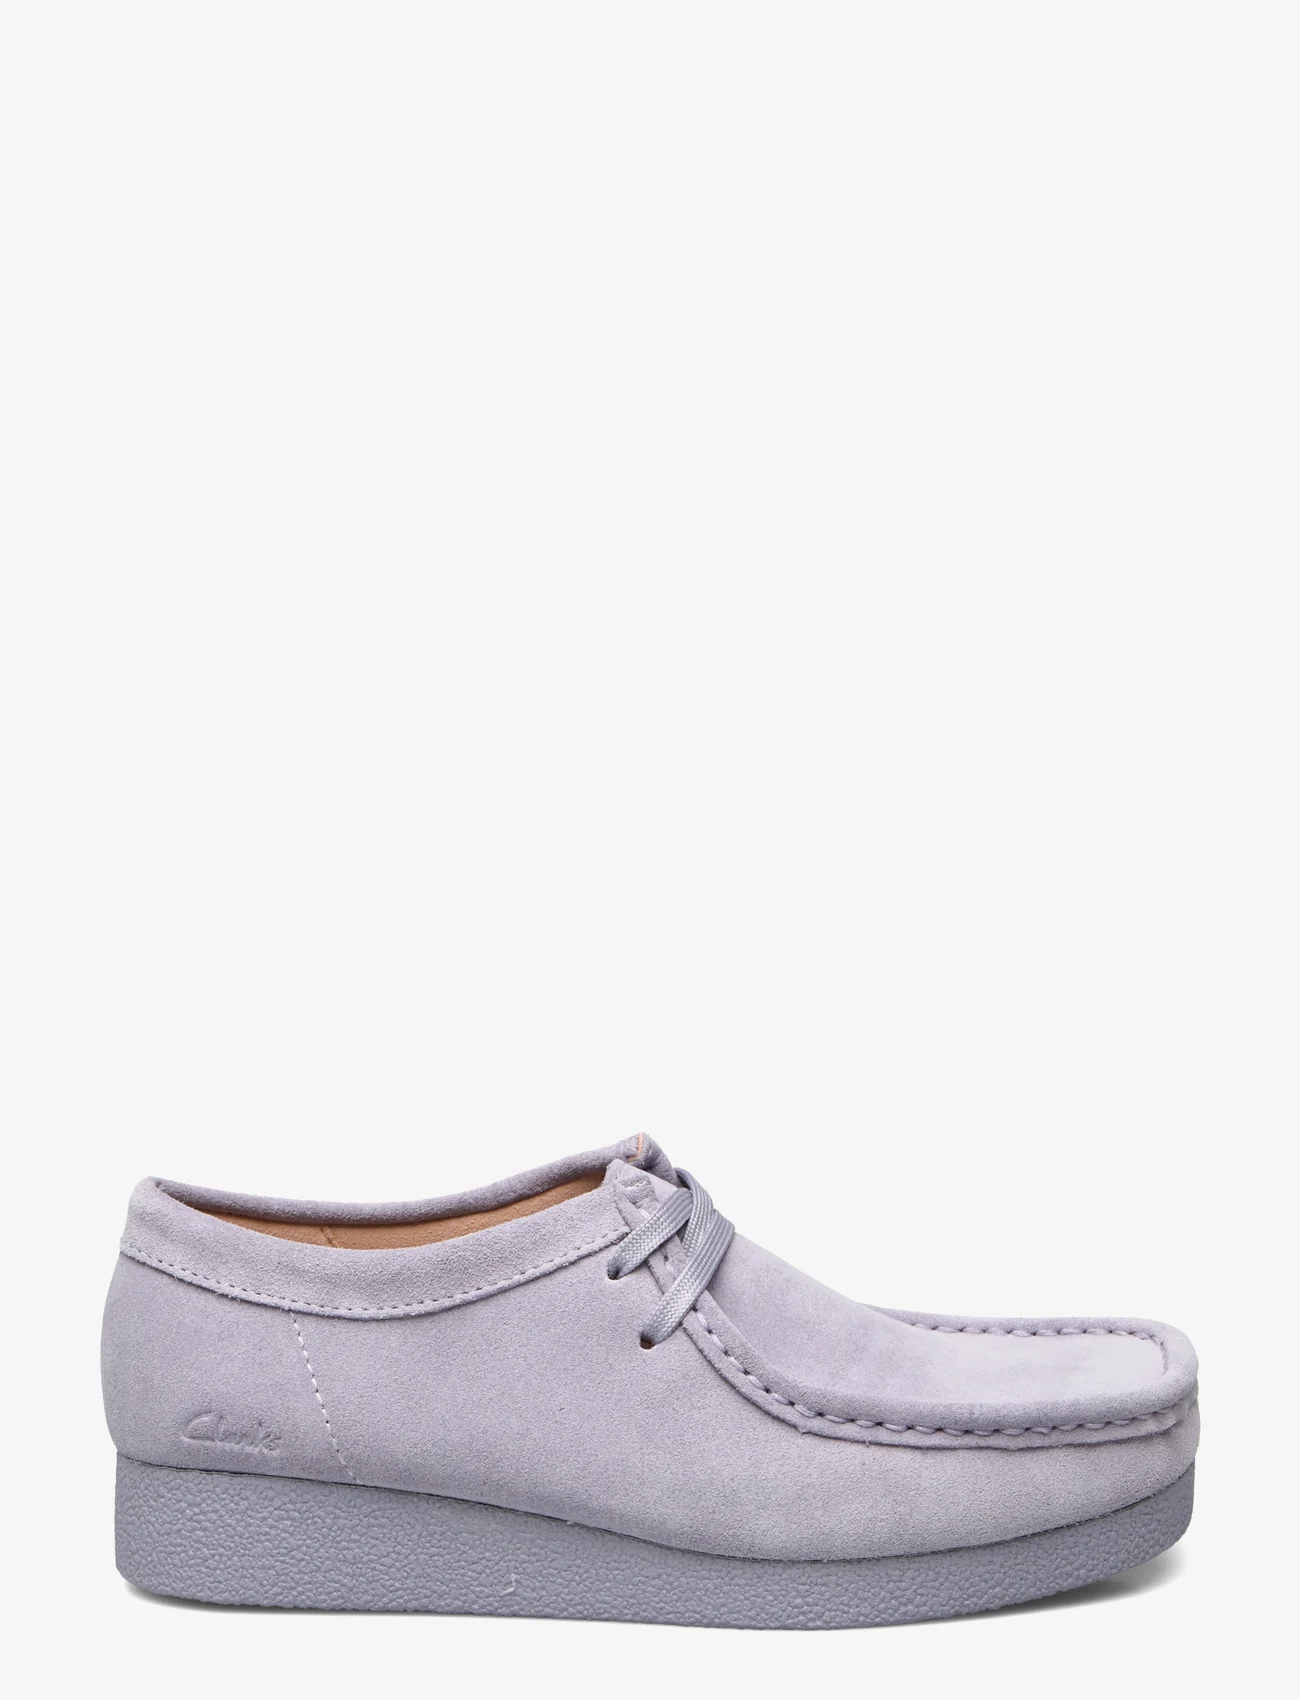 Clarks - WallabeeEVOSh D - loafers - 4337 lilac suede - 1